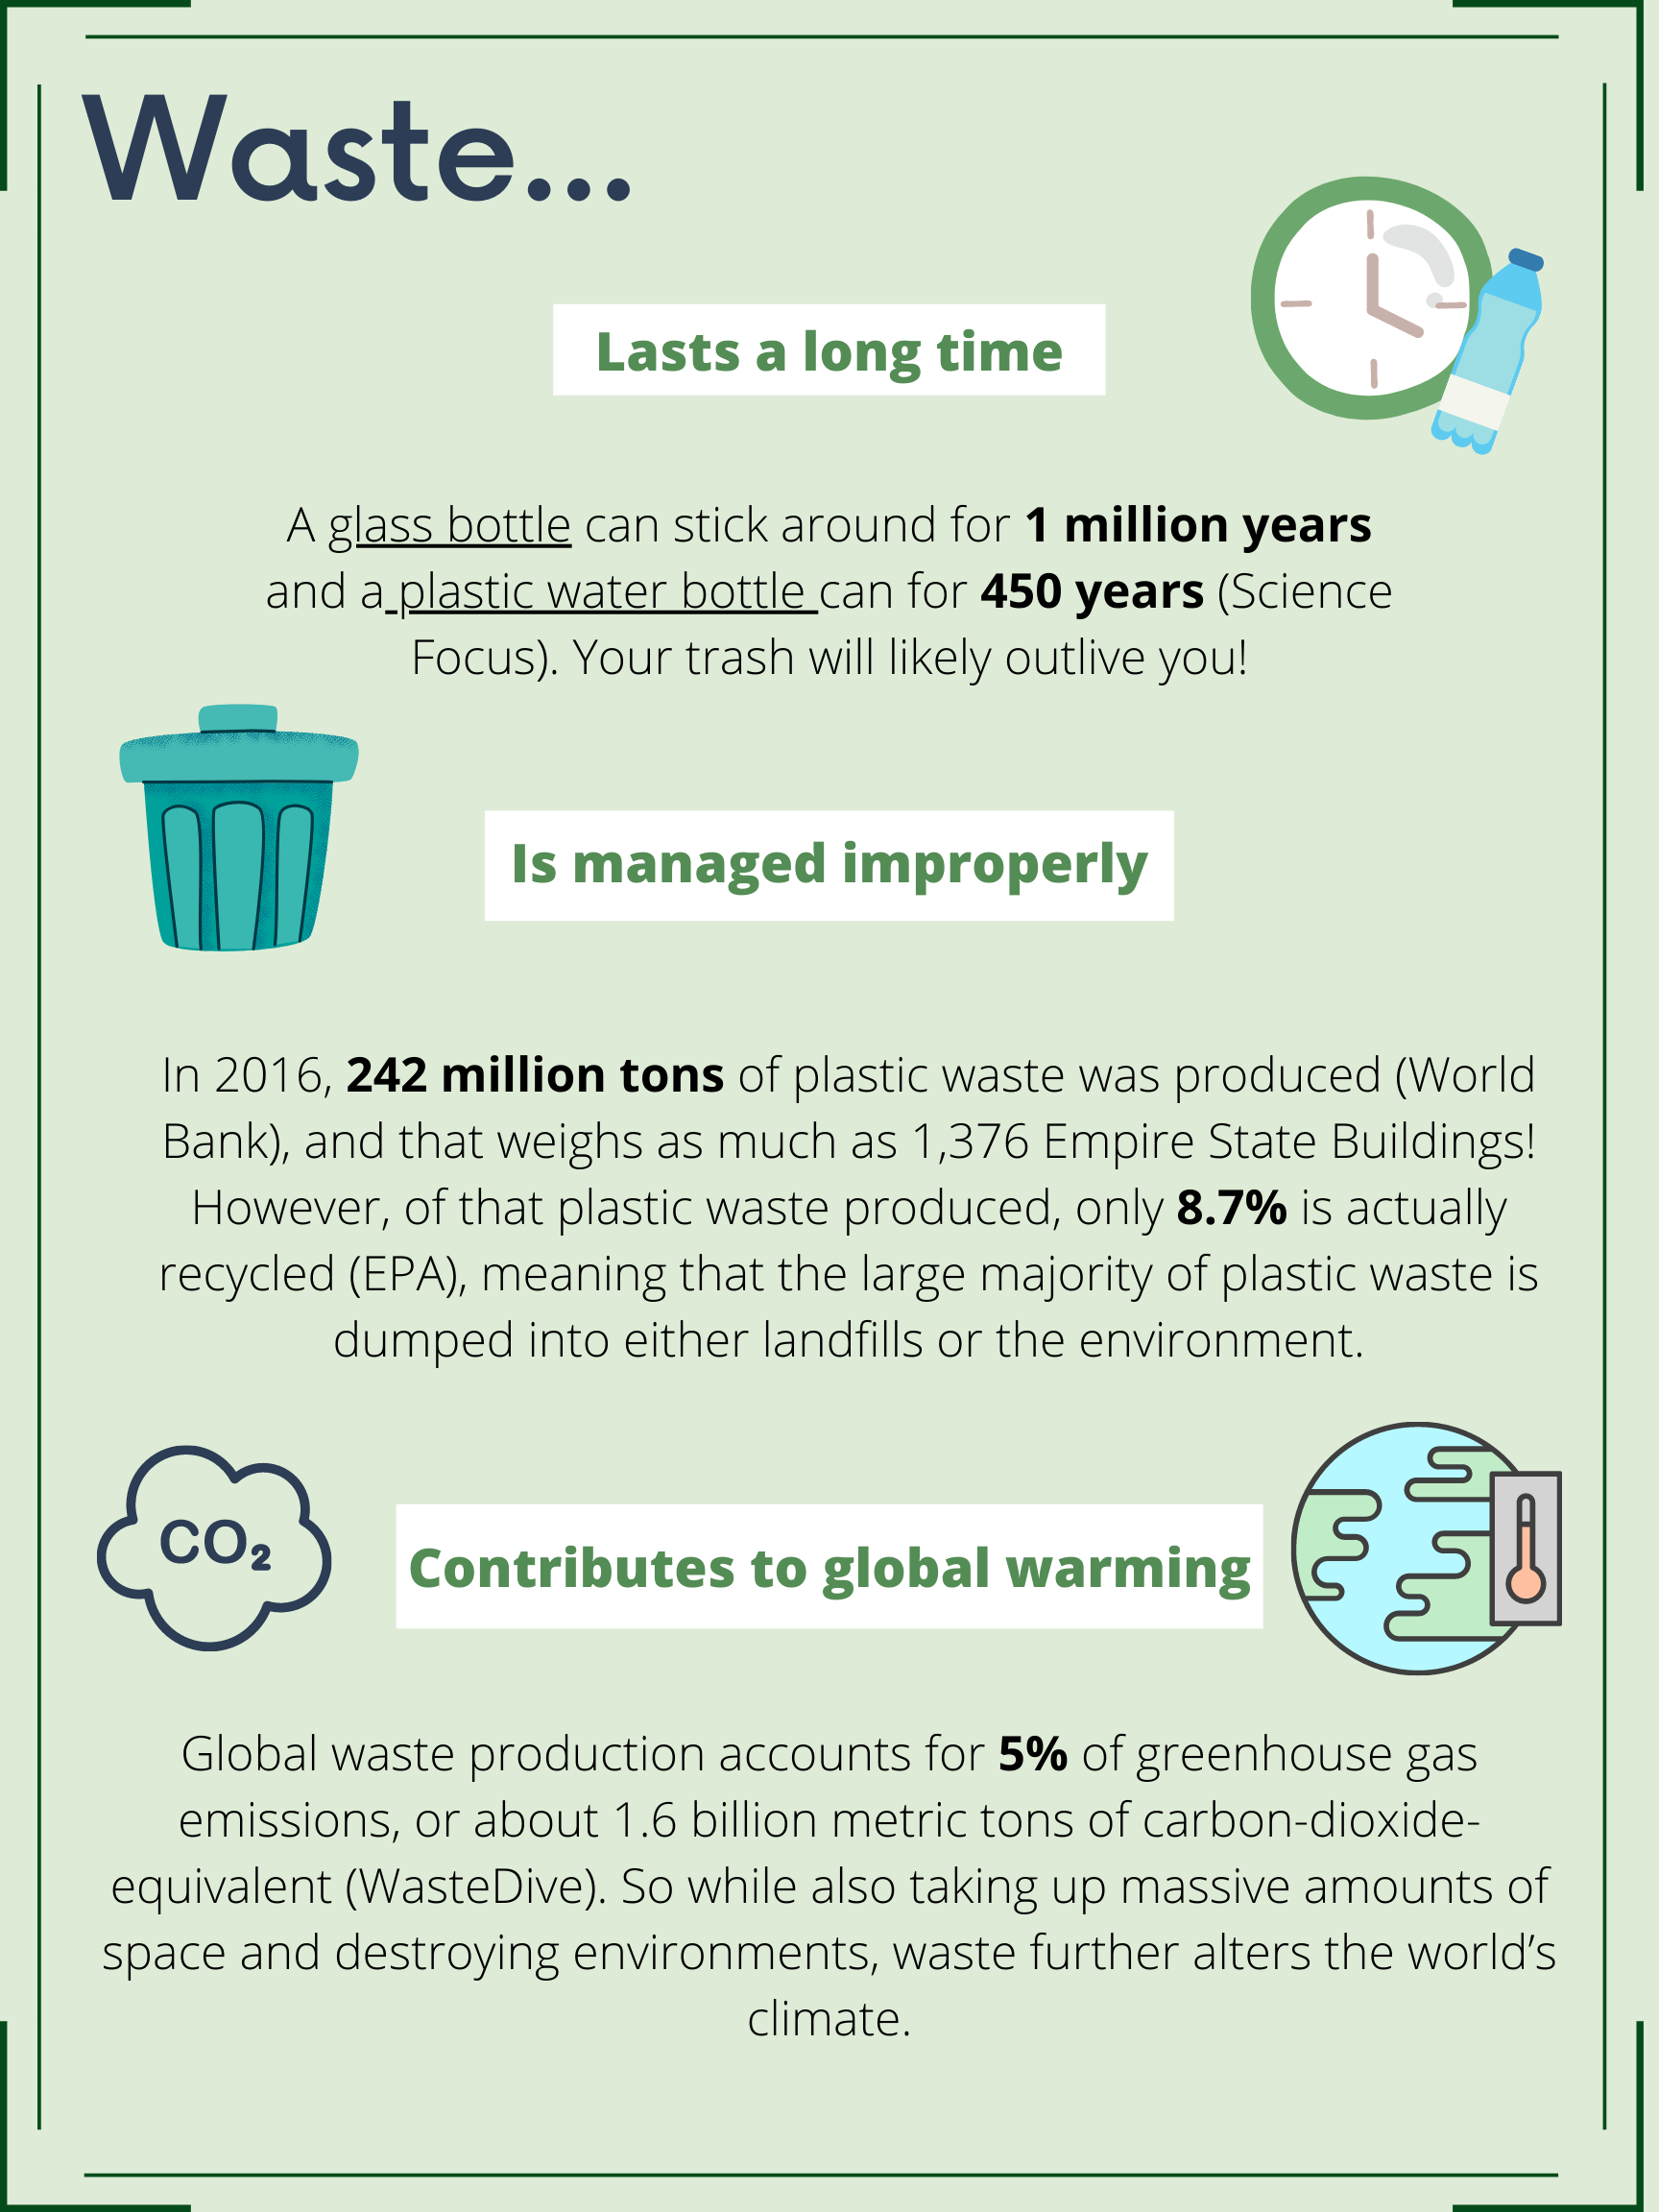 Waste lasts a long time, is managed improperly, and contributes to global warming. A glass bottle can stick around for 1 million years and a plastic water bottle can for 450 years. Your trash will likely outlive you! In 2016, 242 million tons of plastic waste was produced. HOwever of that plastic waste produced, only 8.7% is actually recycled, meaning that the large majority of plastic waste is dumped into either landfills or the environment.